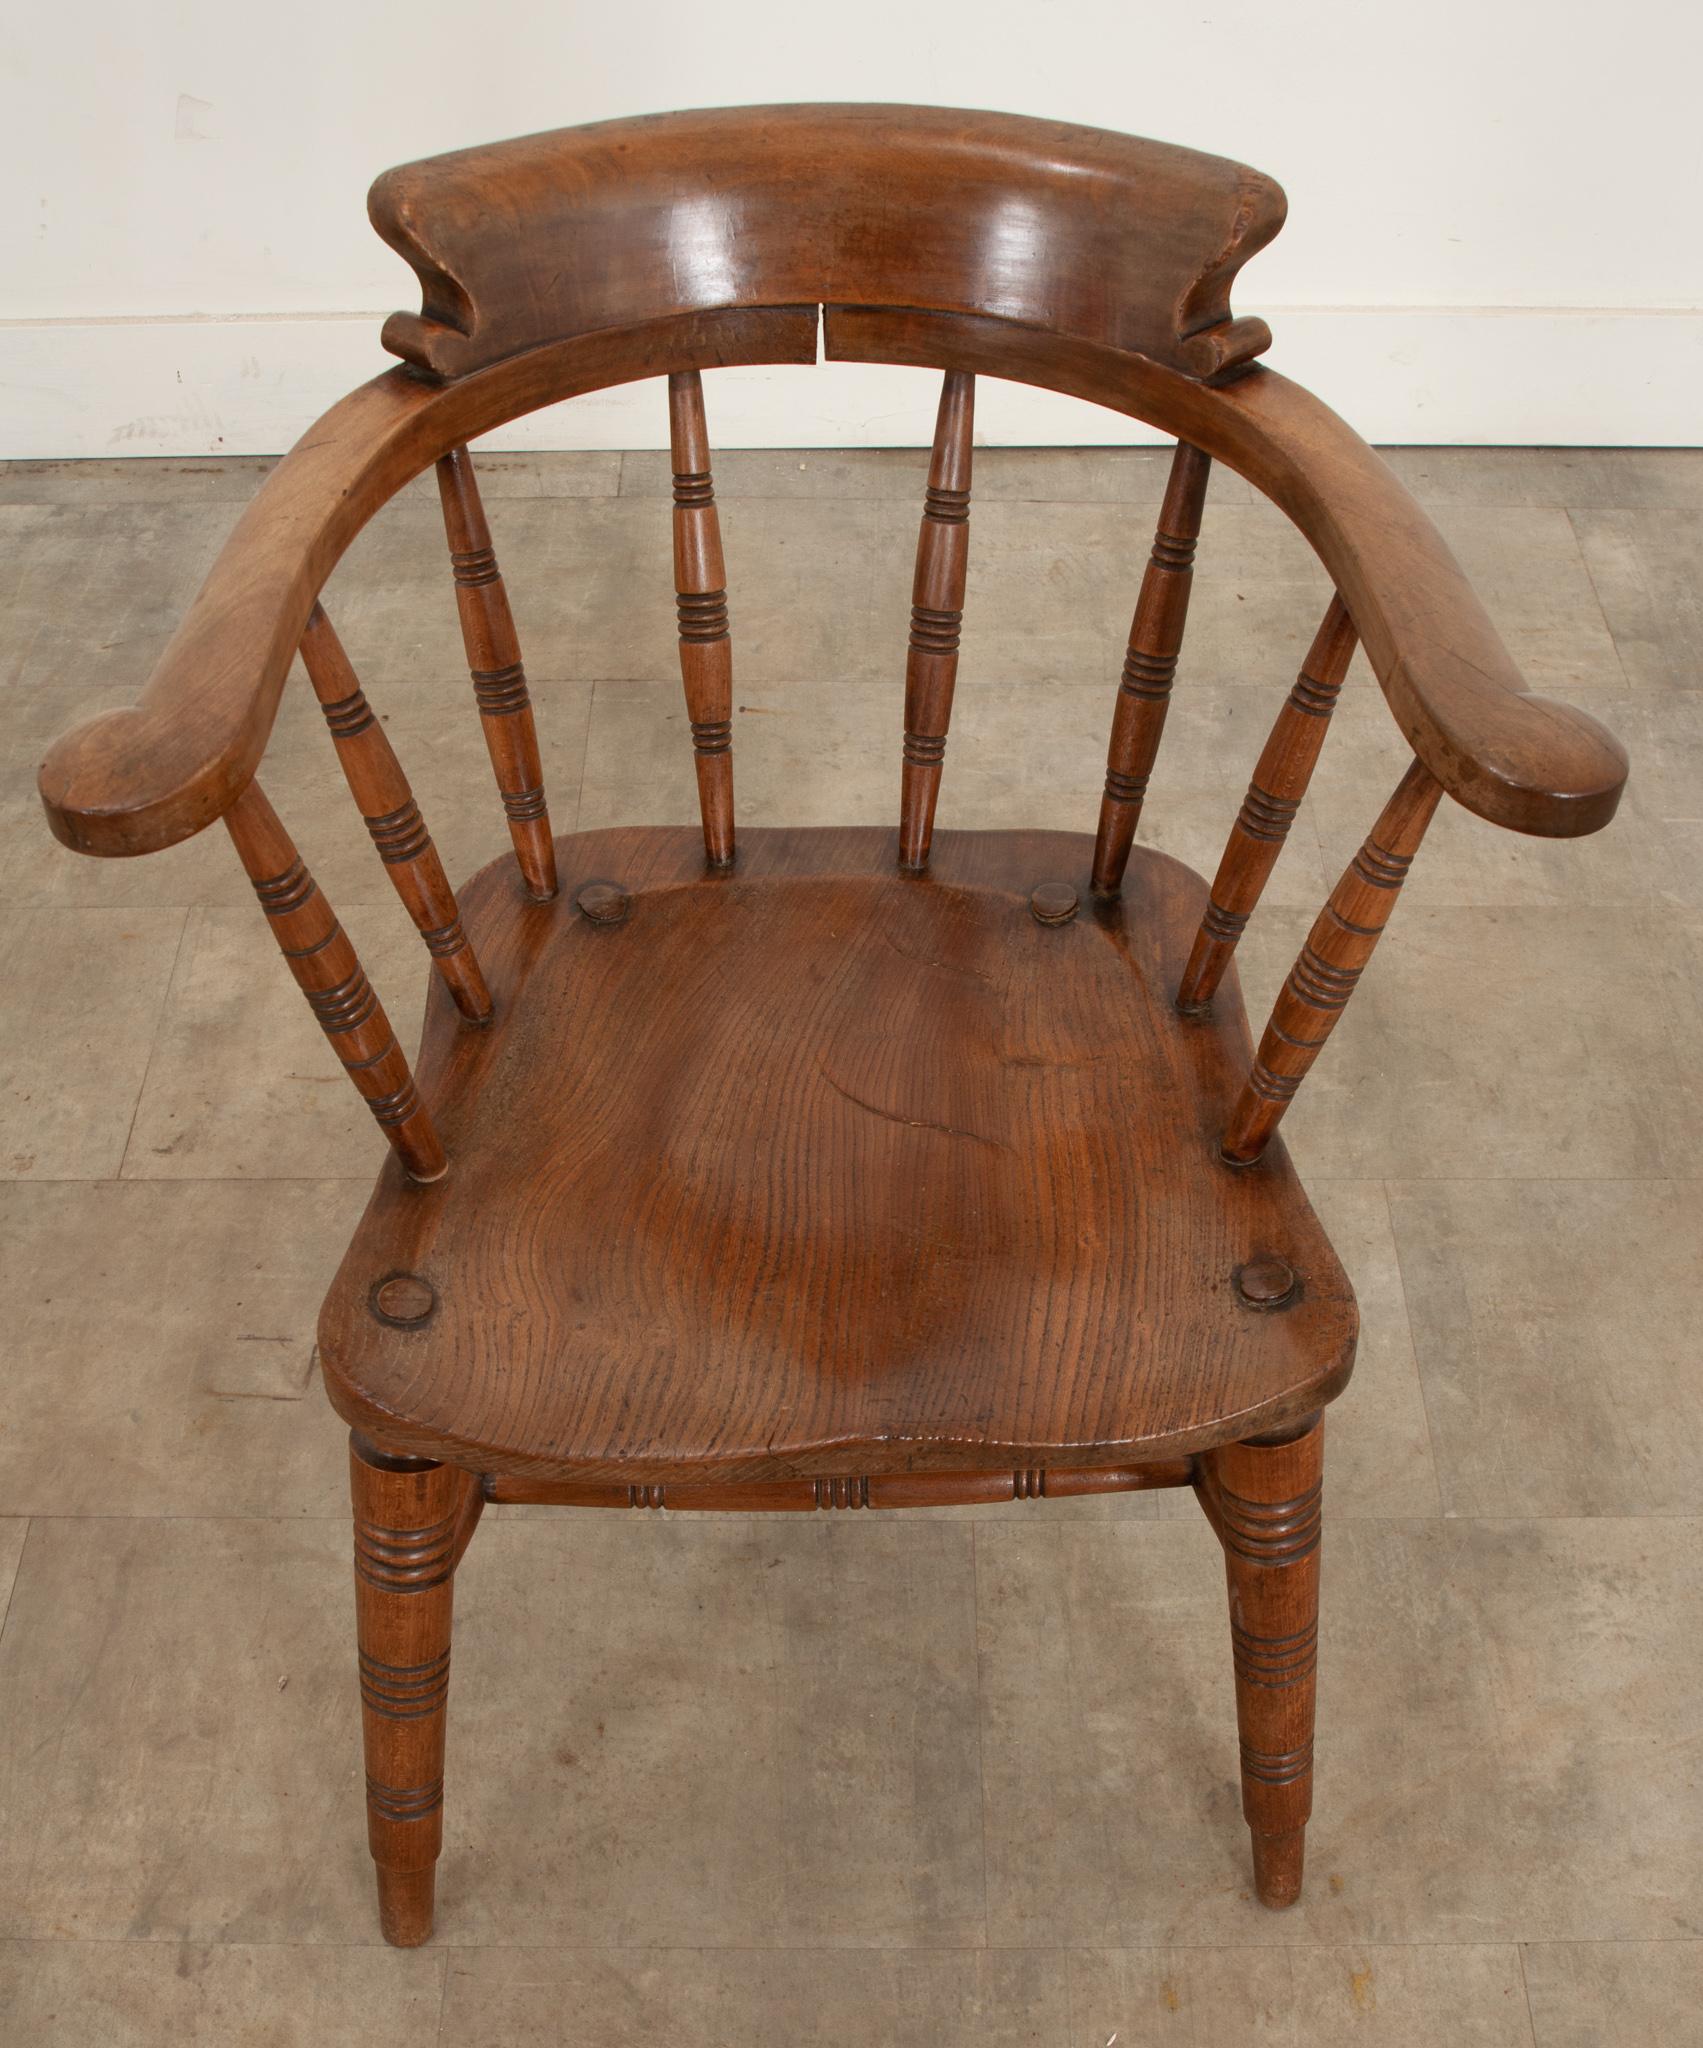 Hand-Carved English 19th Century Smokers Bow Chair For Sale